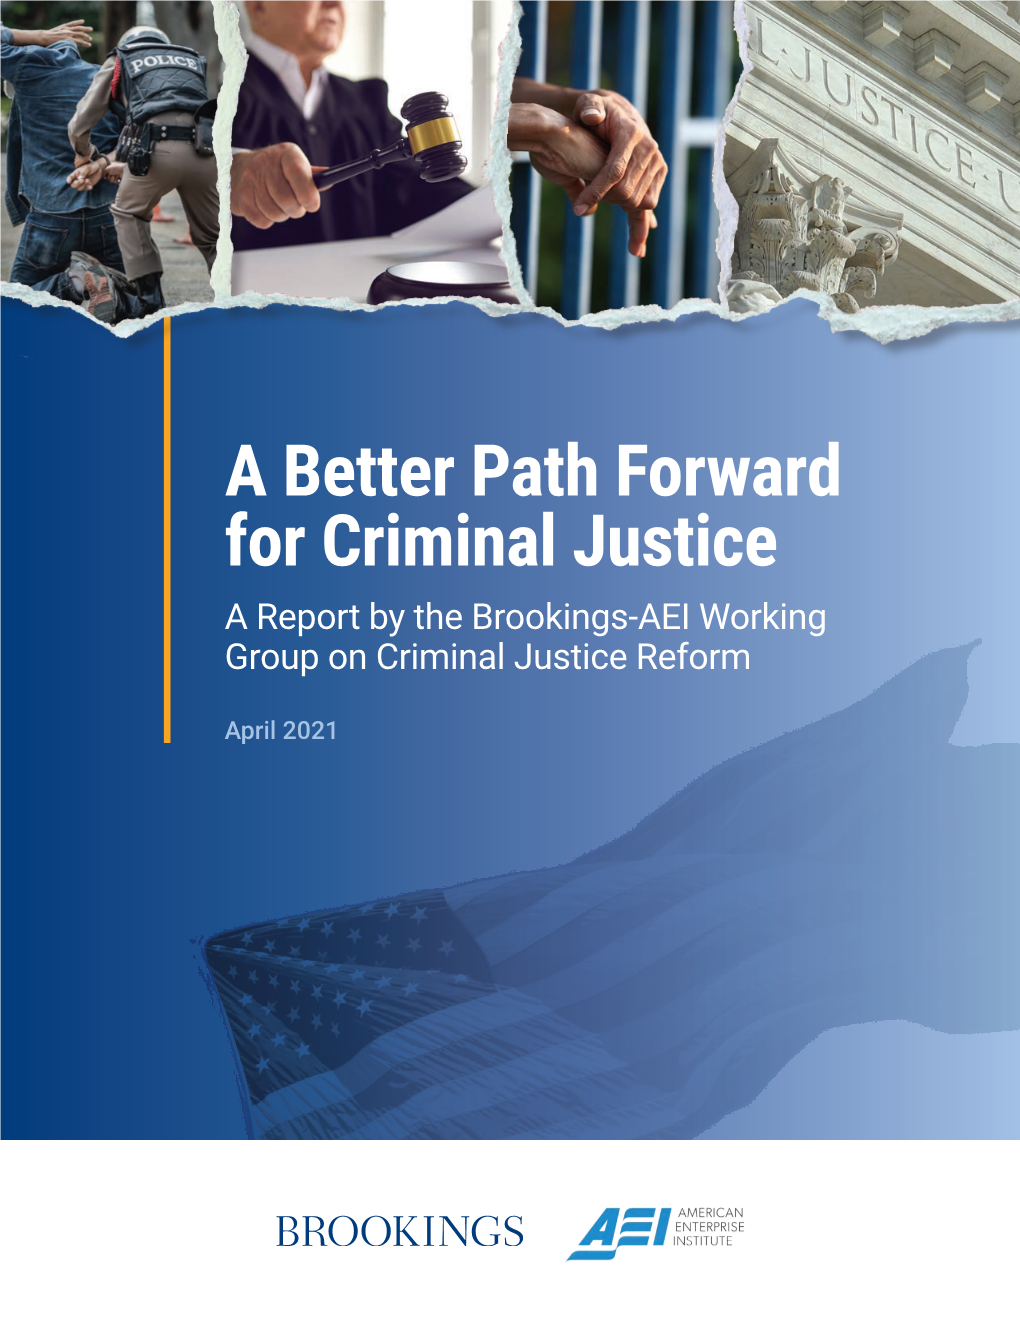 A Better Path Forward for Criminal Justice a Report by the Brookings-AEI Working Group on Criminal Justice Reform